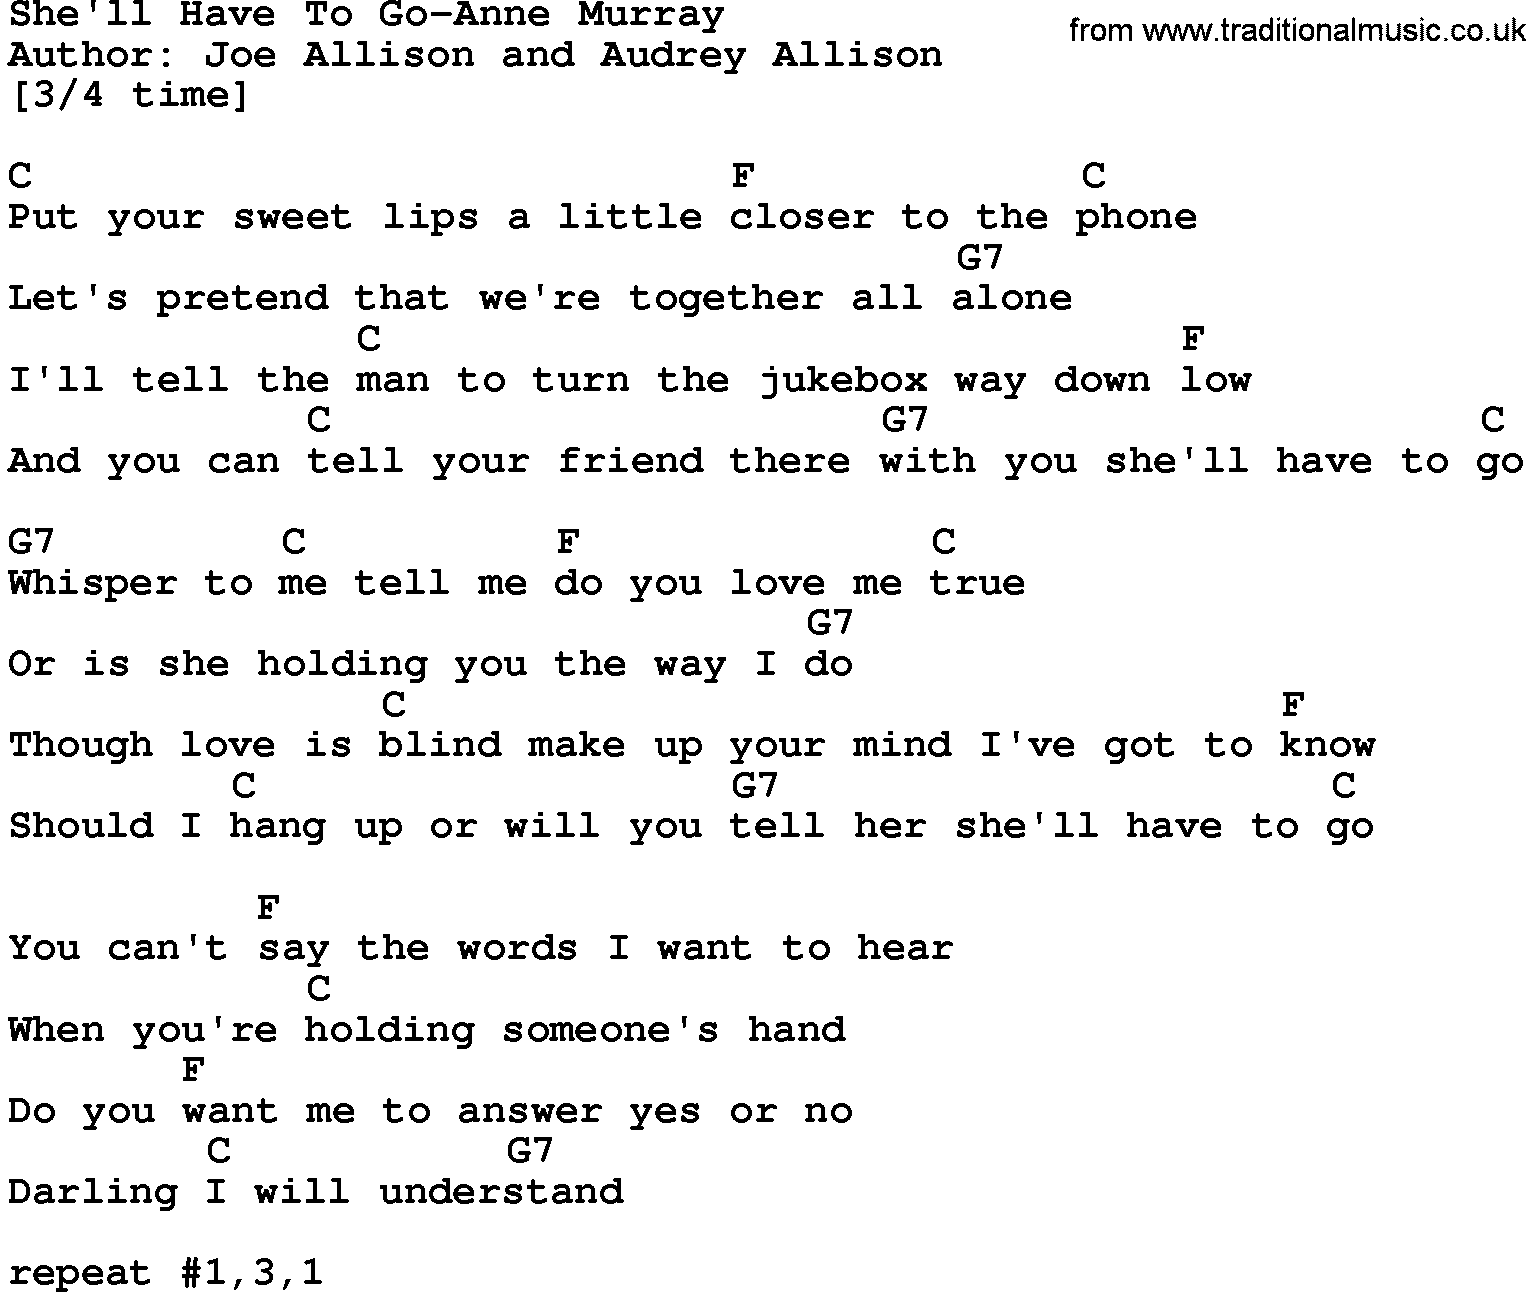 Country music song: She'll Have To Go-Anne Murray lyrics and chords